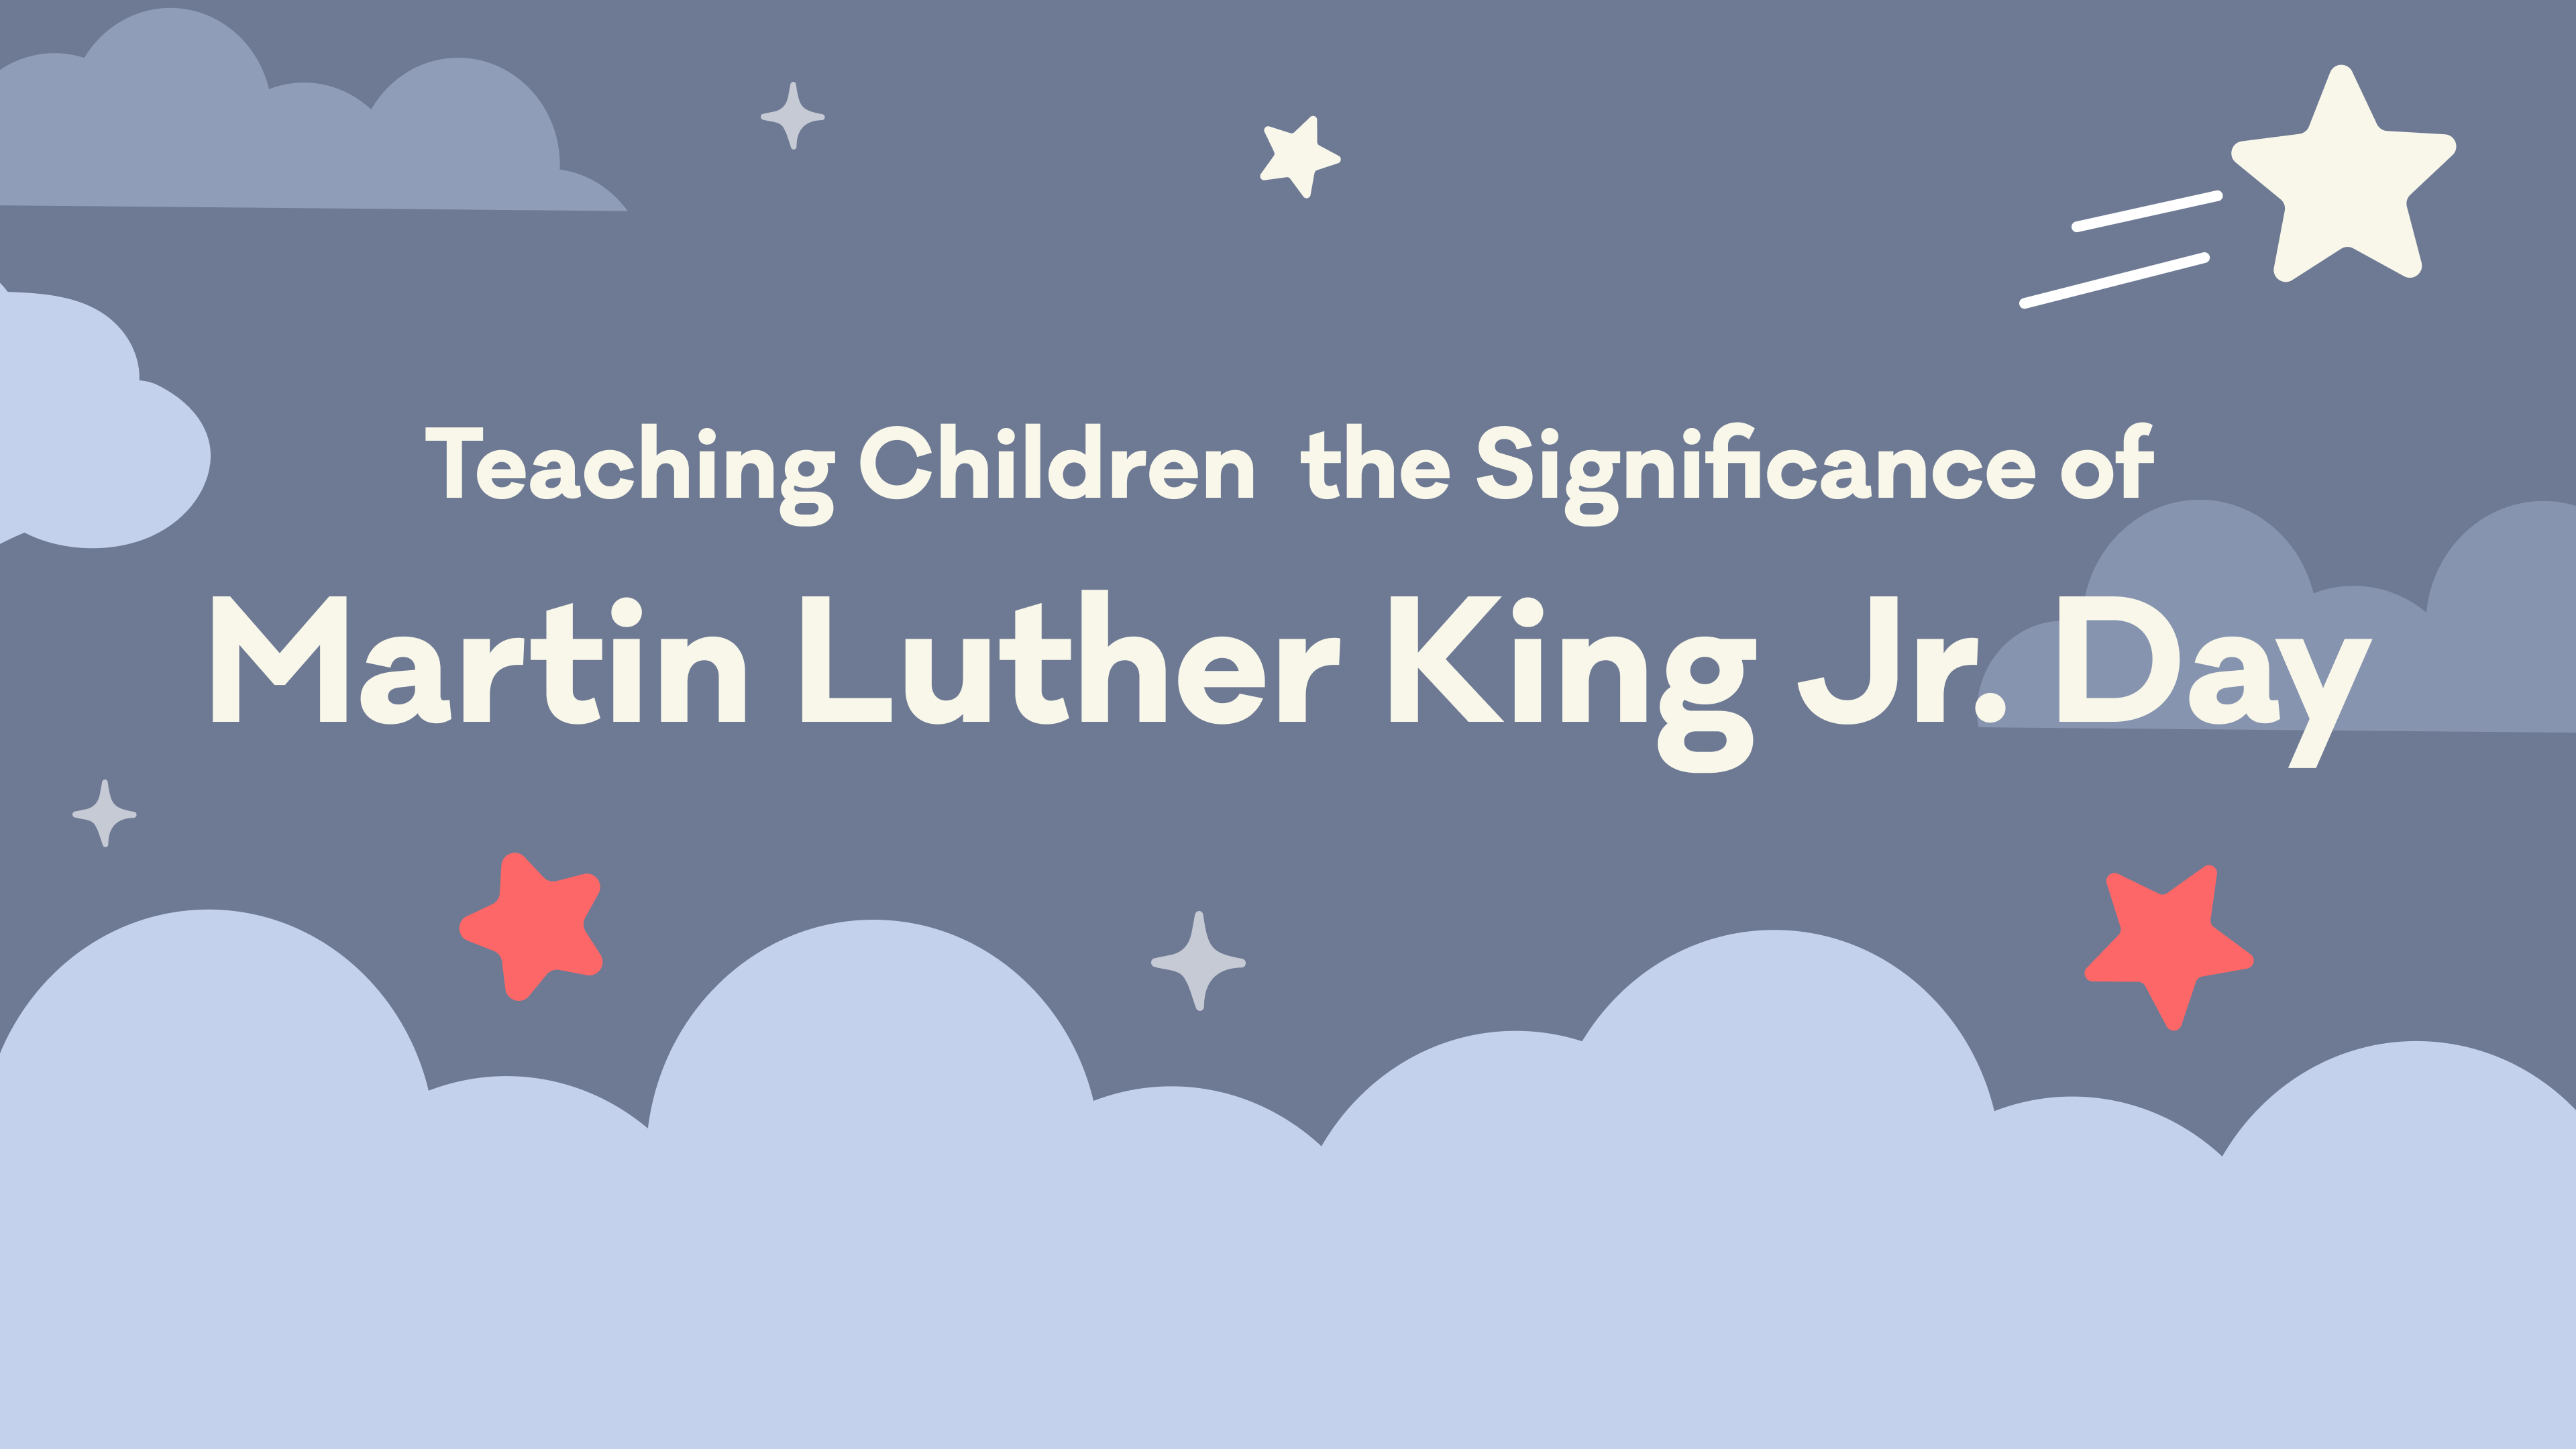 Teaching Children the Significance of Martin Luther King Jr. Day